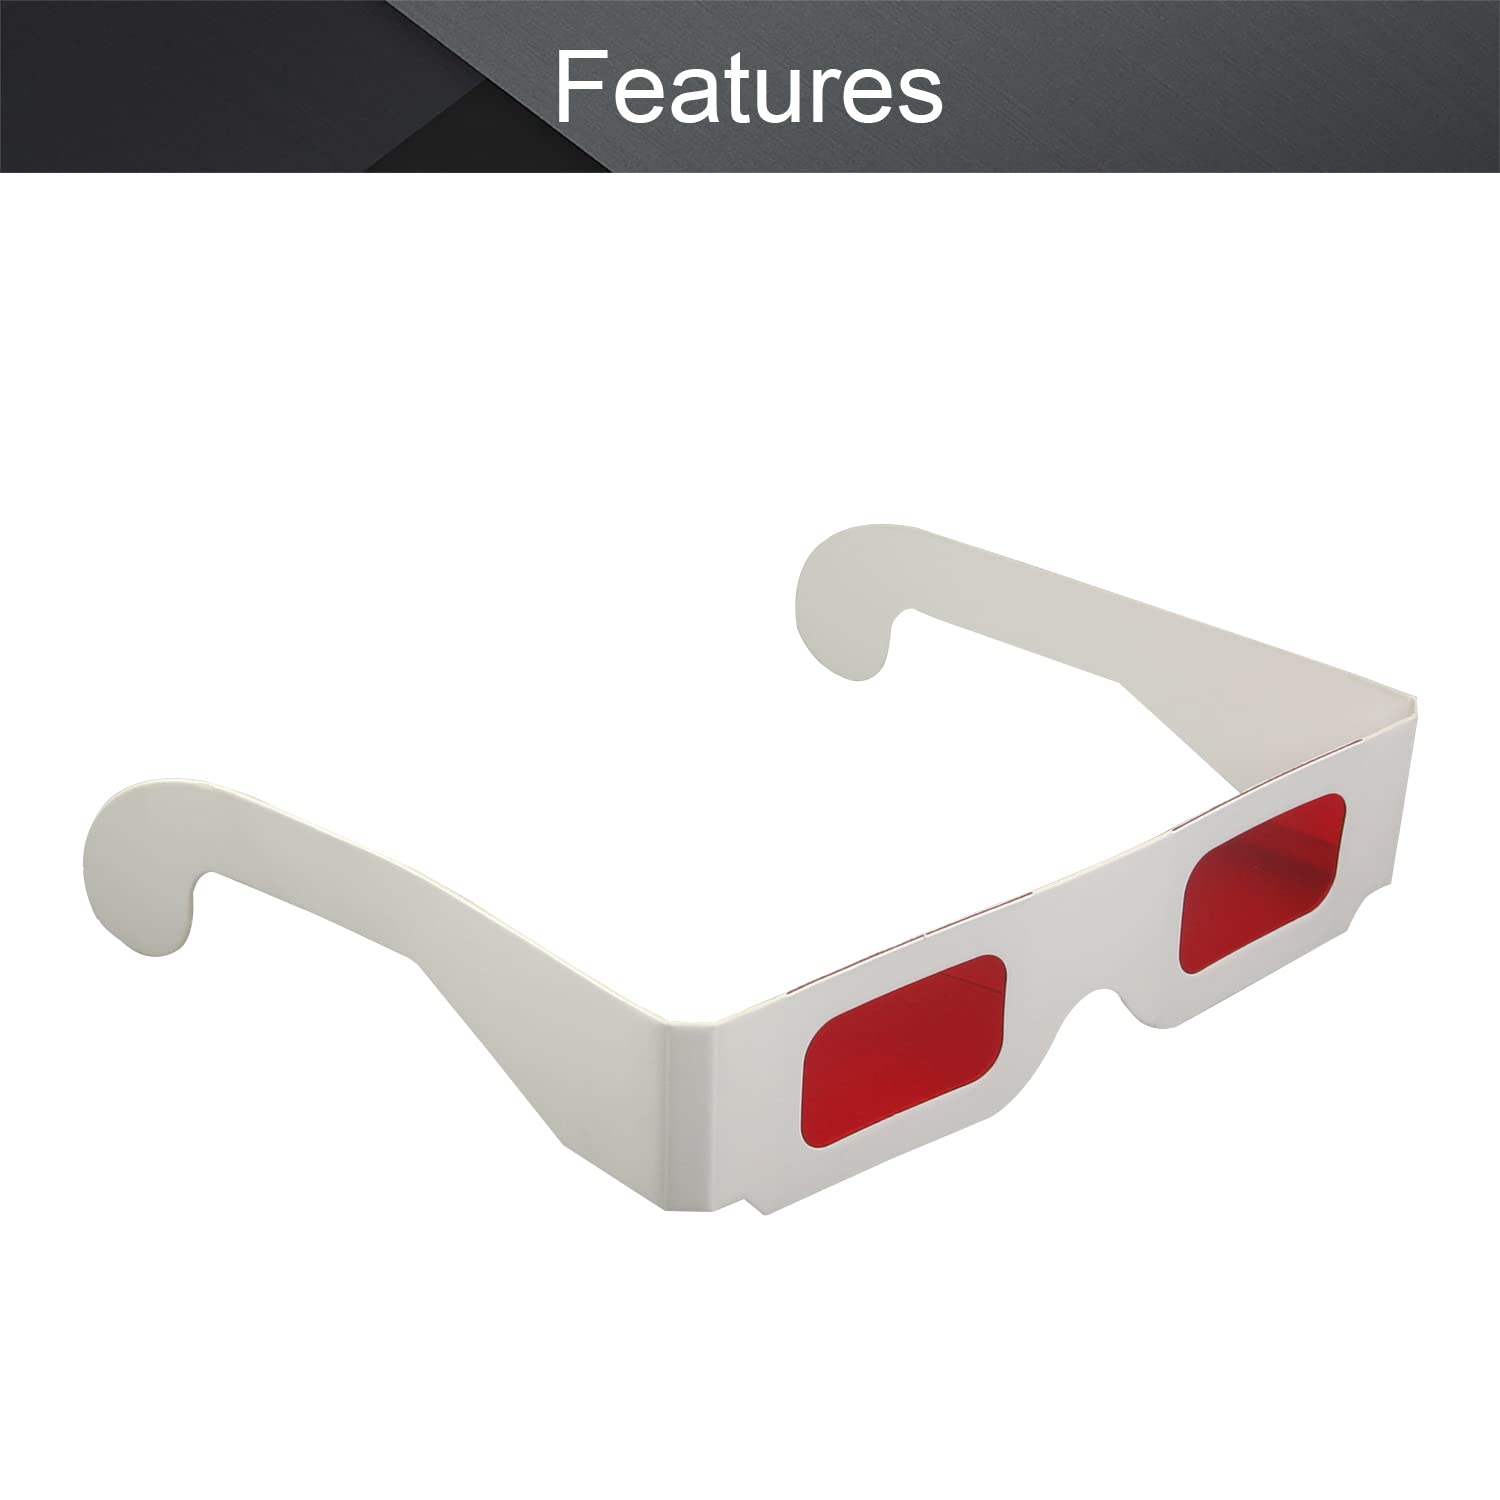 Othmro 20Pcs Red-Red 3D Glasses Carboard Frame White Resin Lens 3D Movie Game-Extra Upgrade Style Glasses 3D Viewing Glasses for Anaglyph Movie Photo Projector Film Television Computer Screen Game